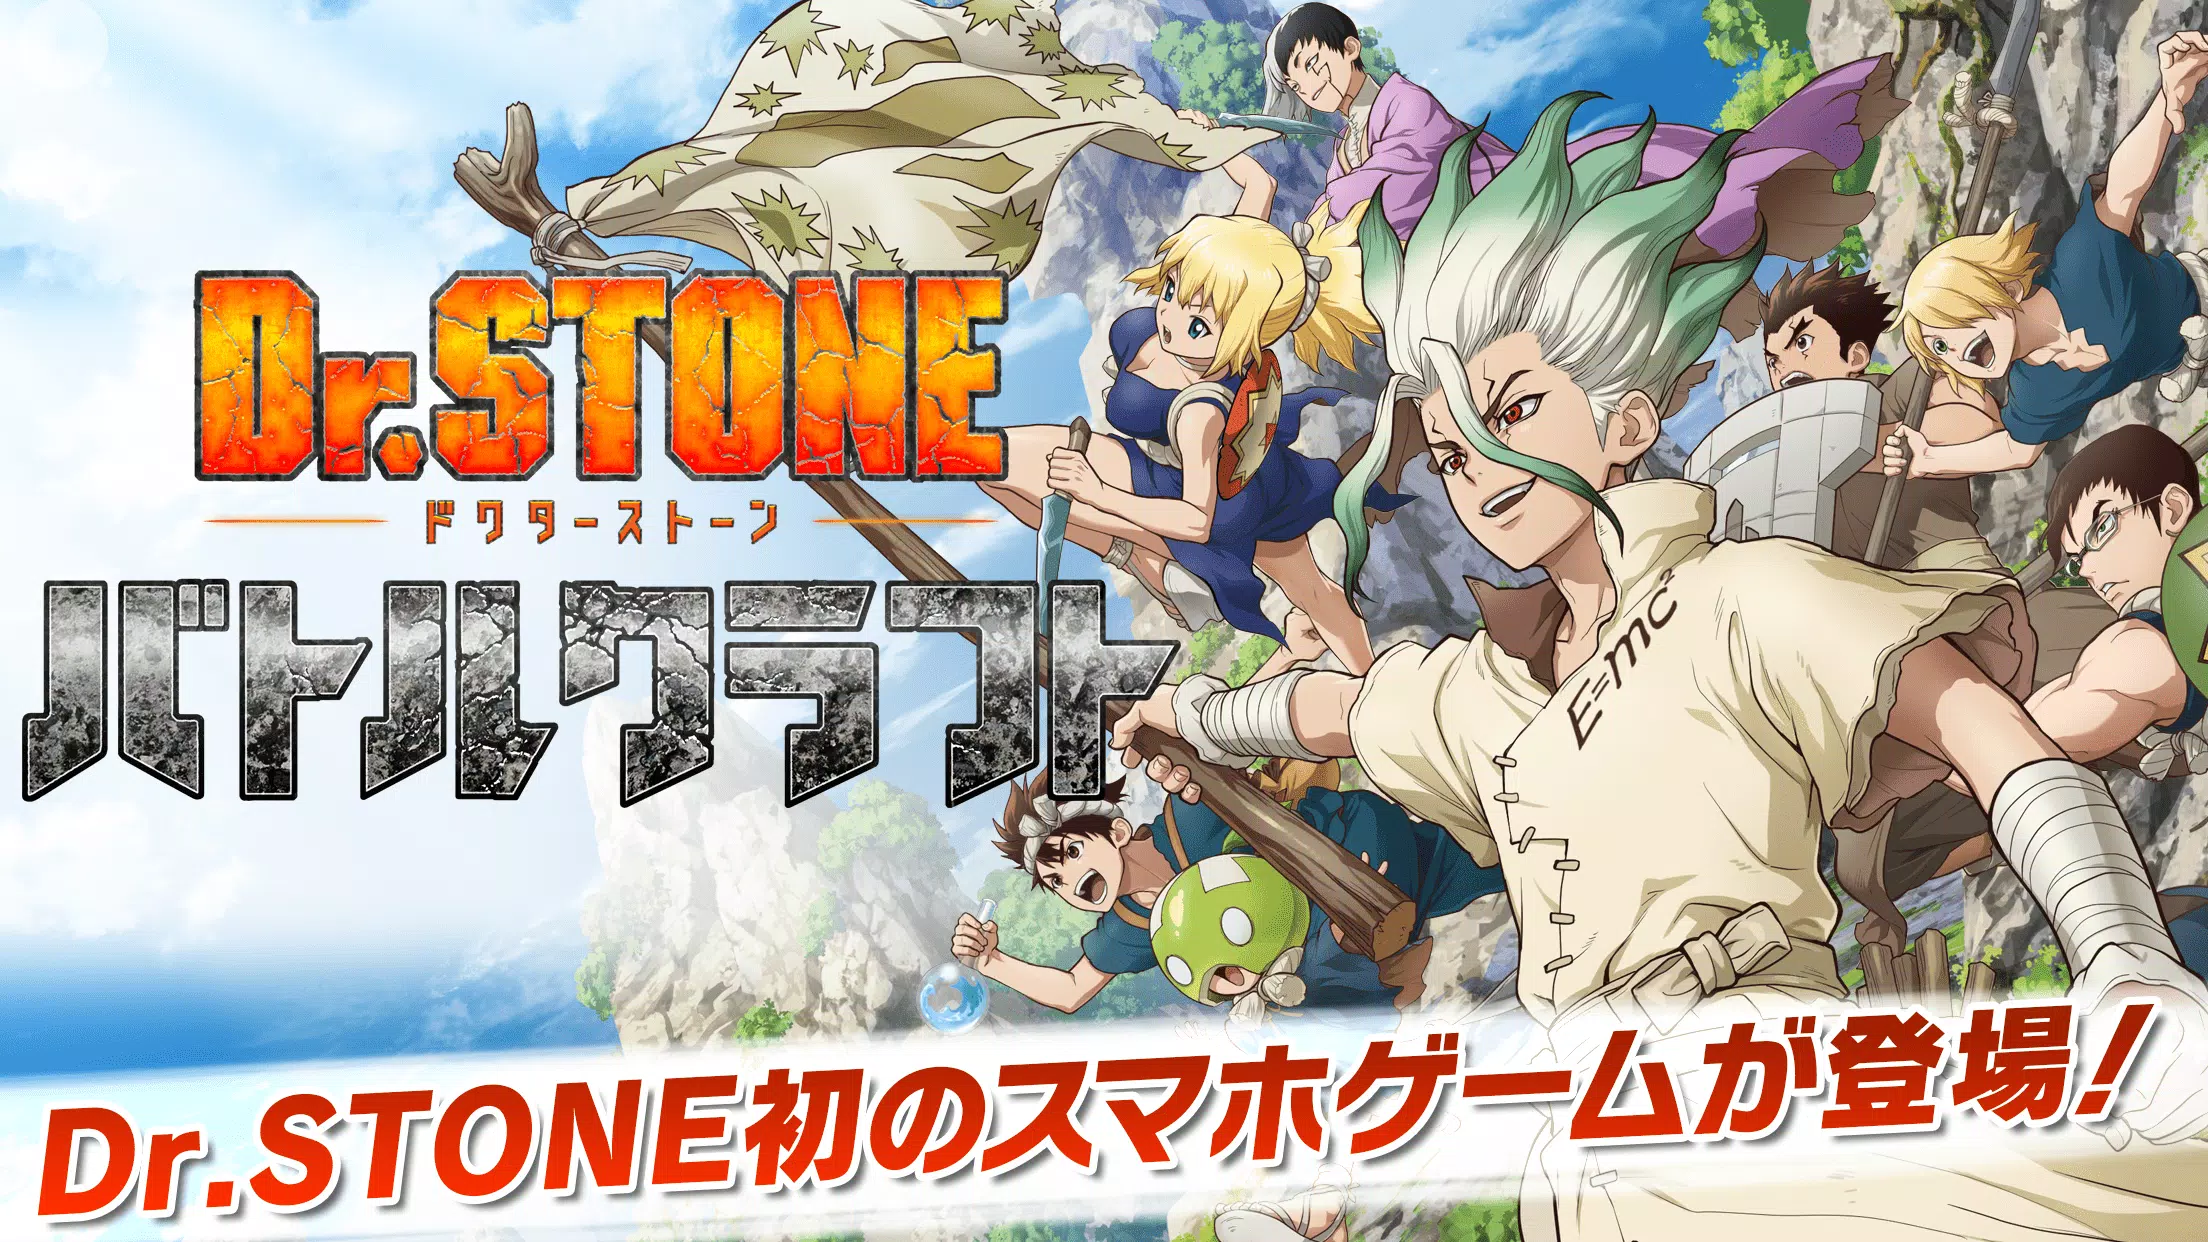 Dr Stone バトルクラフトーアニメ公式のバトルゲーム For Android Apk Download